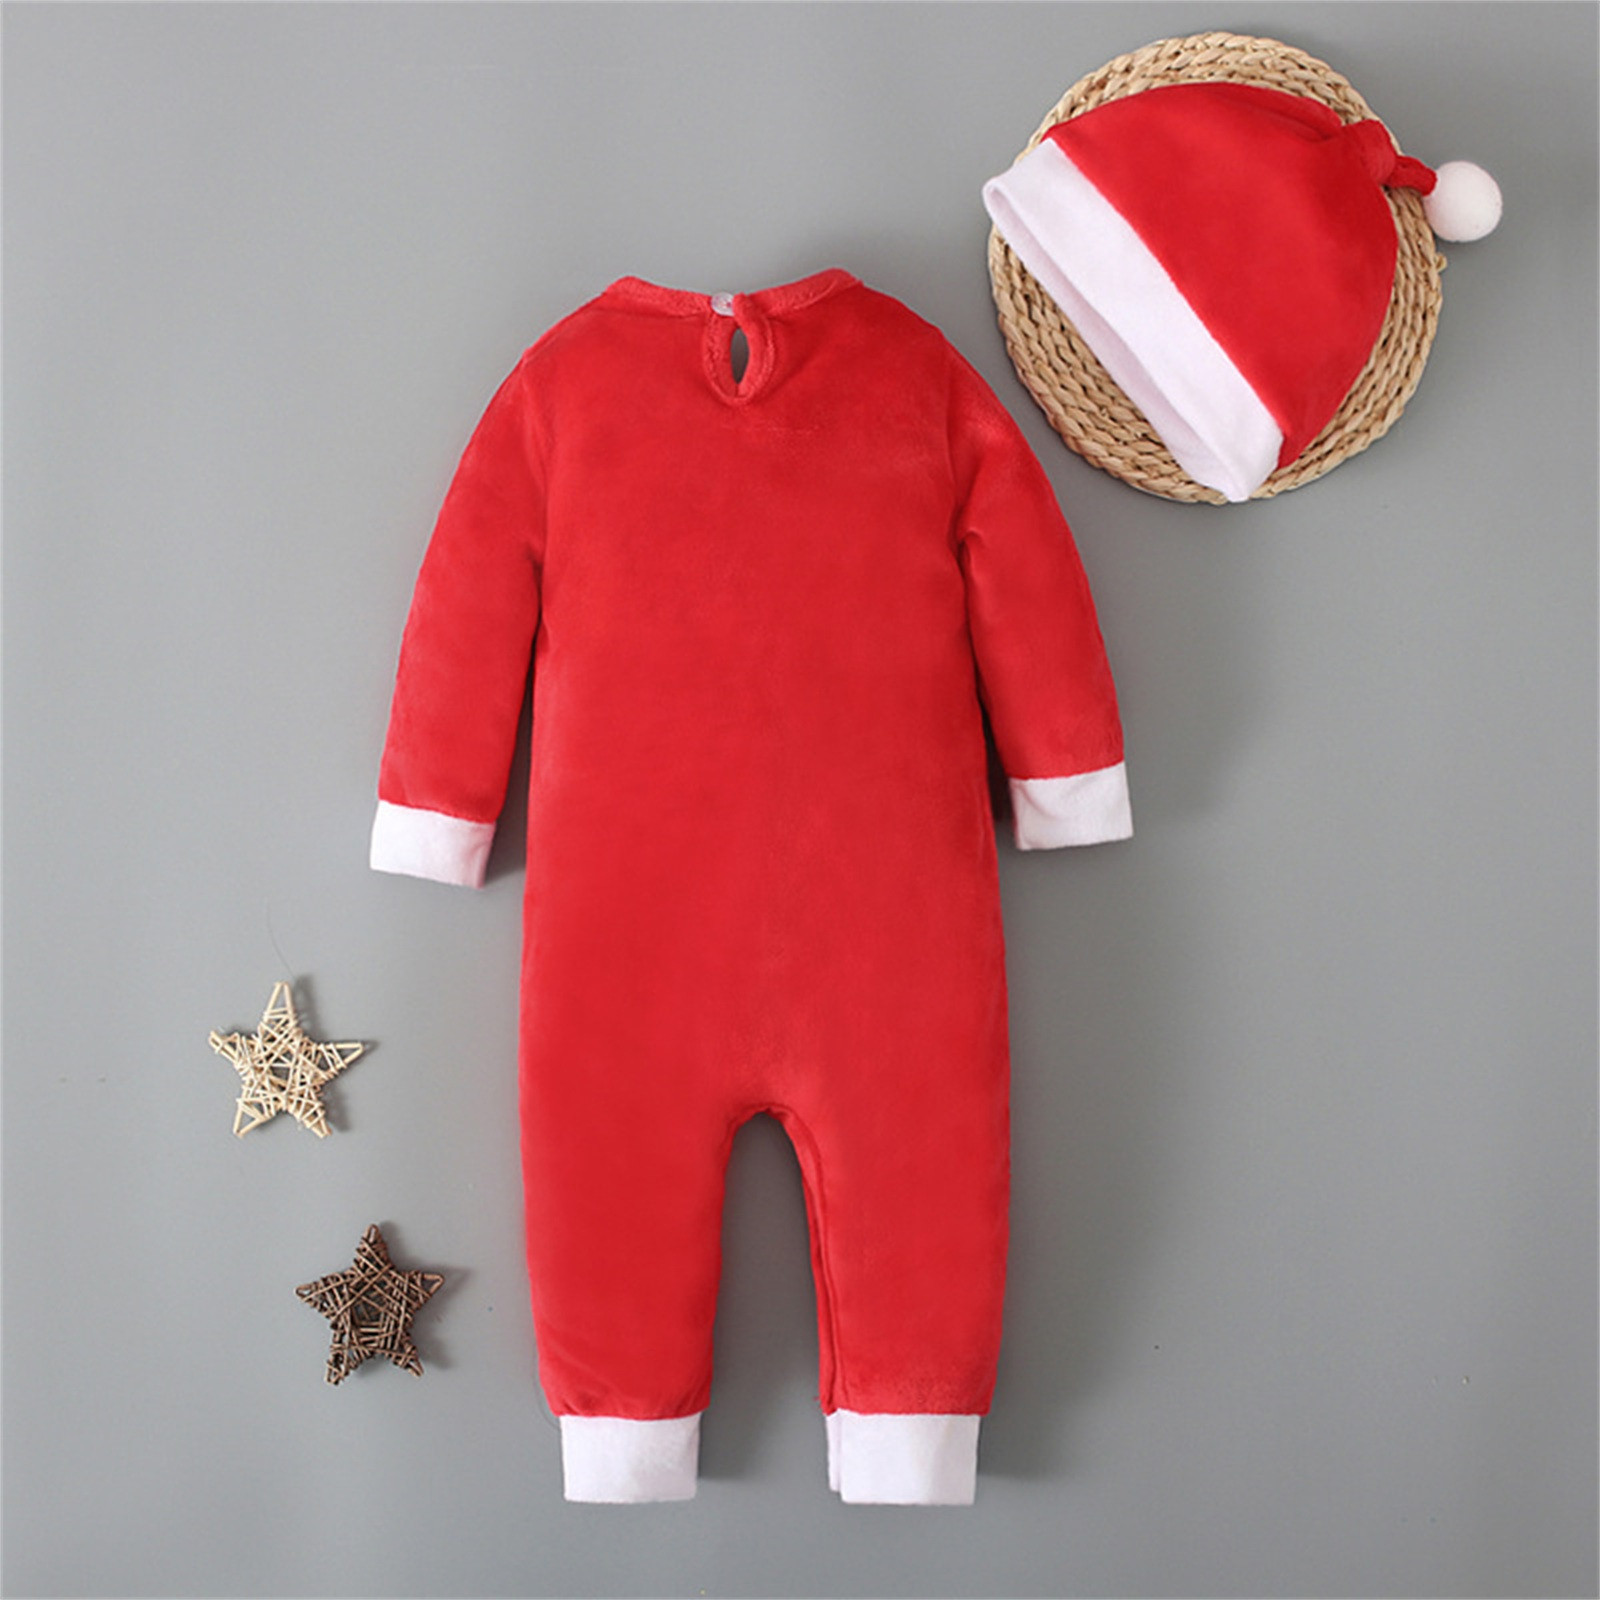 Footies Baby Xmas Clothes born Infant Santa Christmas Romper Hat Outfit Costume Winter Clothing 220922